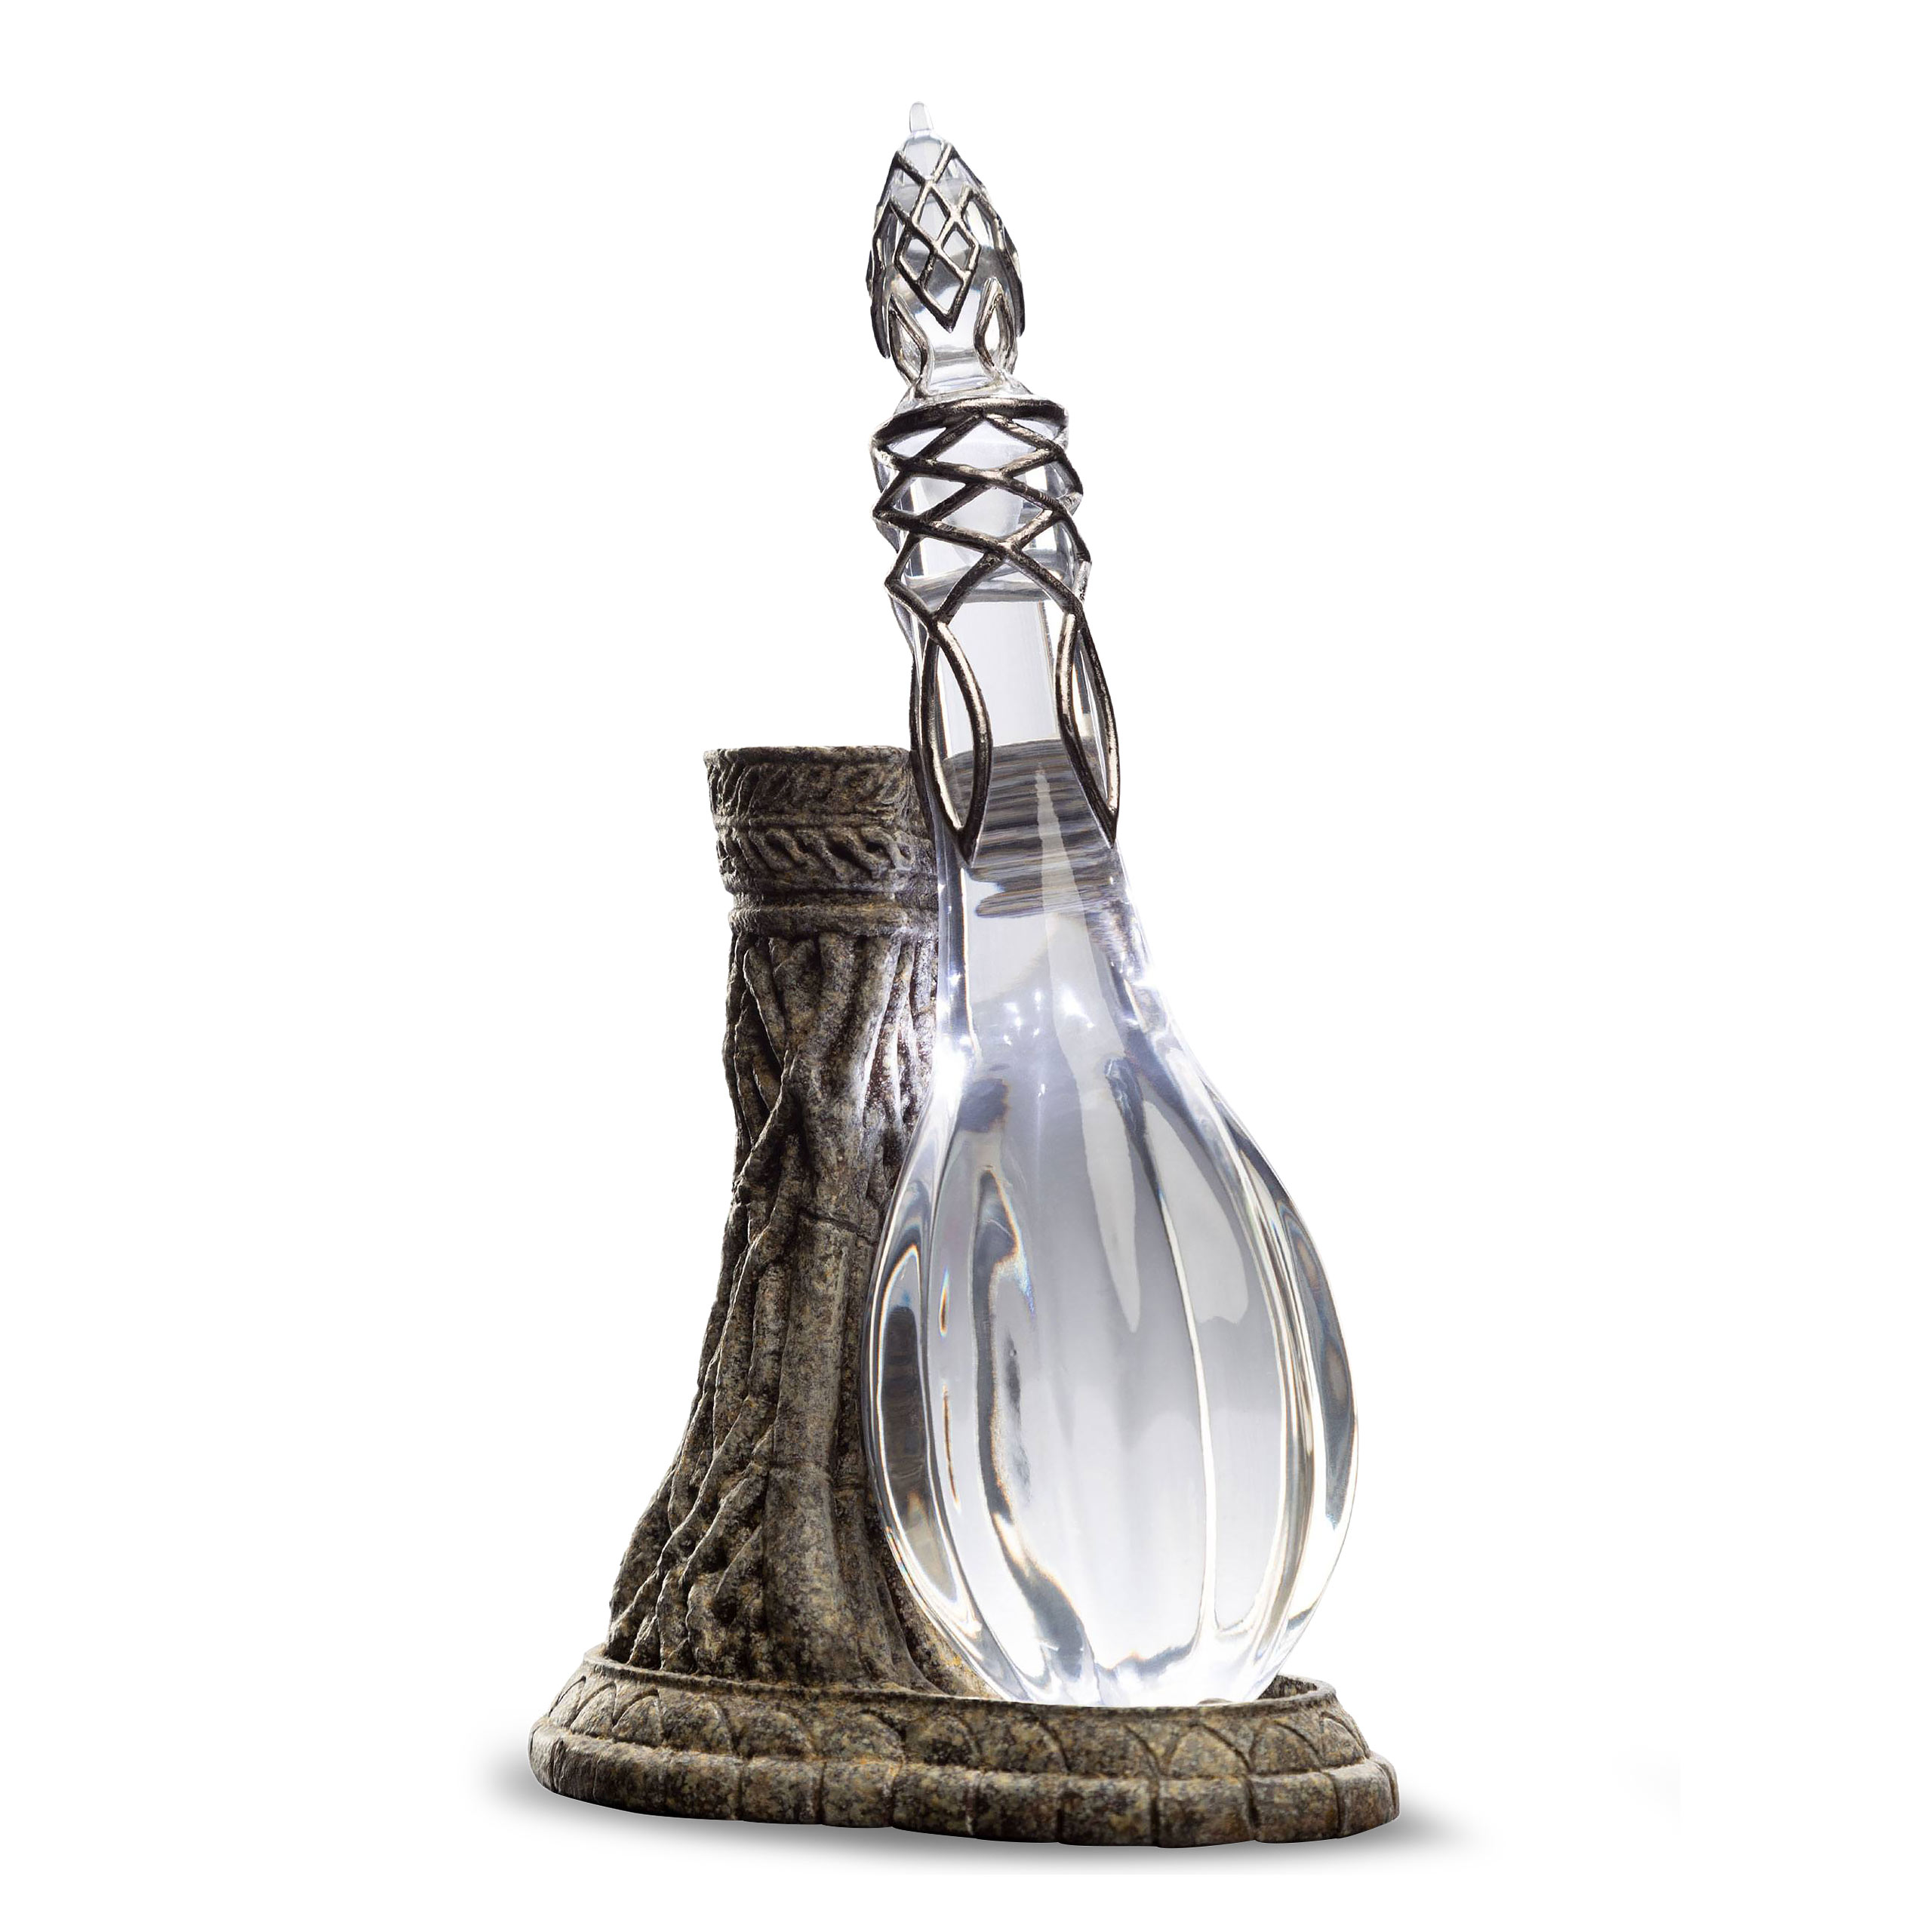 Lord of the Rings - Galadriel's Phial Replica